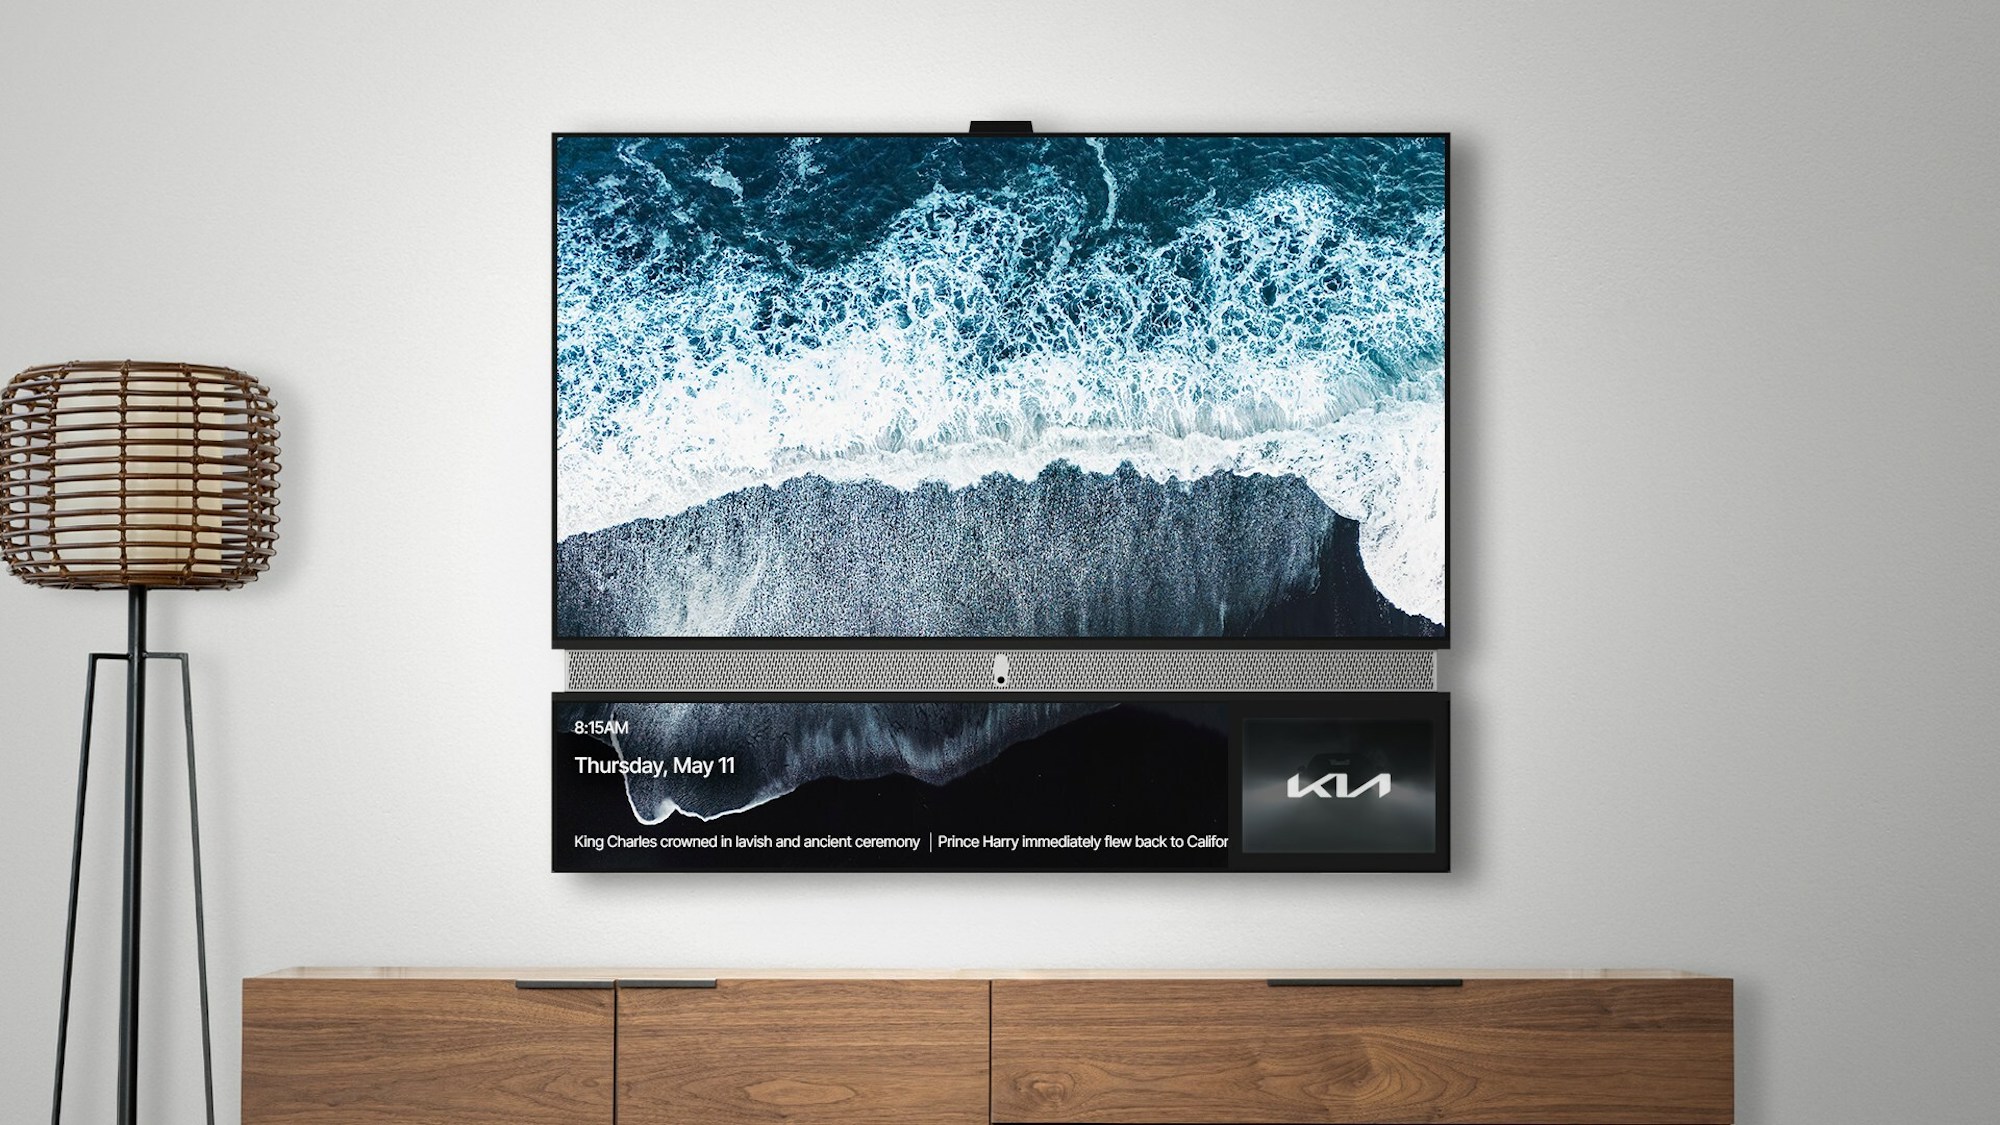 Telly dual-screen smart TV mounted on wall